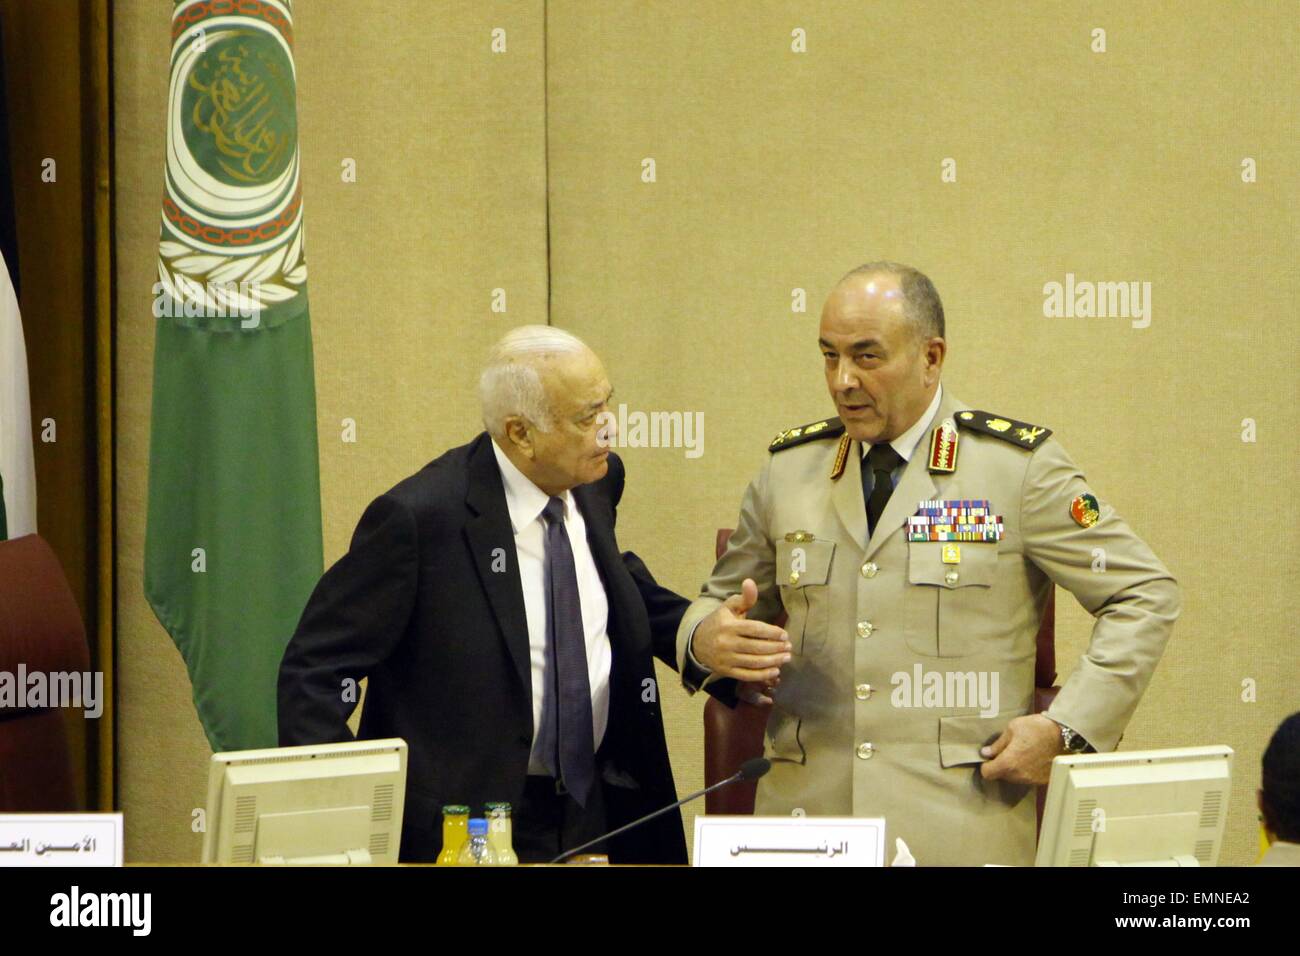 Cairo, Egypt. 22nd Apr, 2015. Arab League Secretary General Nabil al-Araby (L) speaks to Chief of Staff of the Egyptian army, Mahmoud Hegazy (R) during the Arab League meeting of the army chiefs from Arab League in Cairo, capital of Egypt, April 22, 2015.Arab military chiefs of staff discussed on Wednesday the formation of a joint Arab military force to combat terrorism and protect Arab national security. © Ahmed Gomaa/Xinhua/Alamy Live News Stock Photo